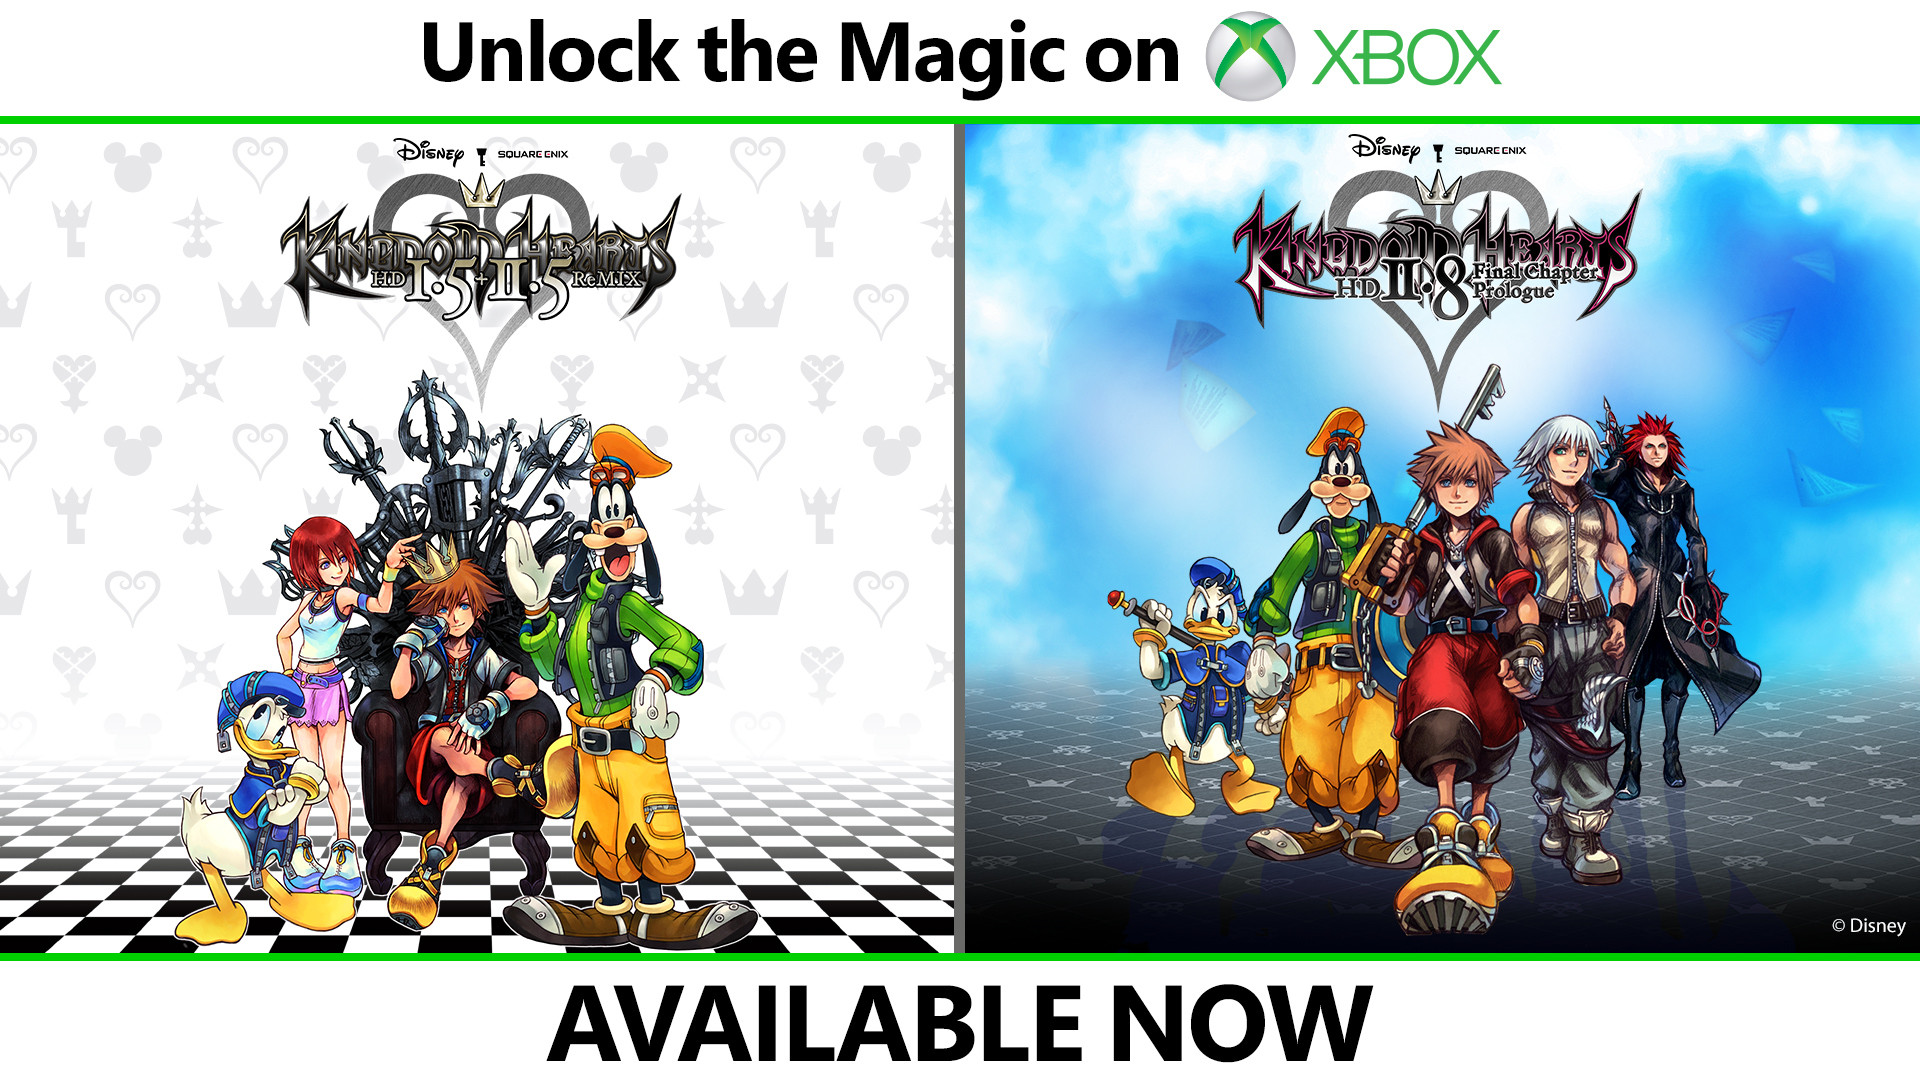 Kingdom Hearts HD 1.5 + 2.5 ReMix and Kingdom Hearts HD 2.8 Final Chapter Prologue Available Now on Xbox One